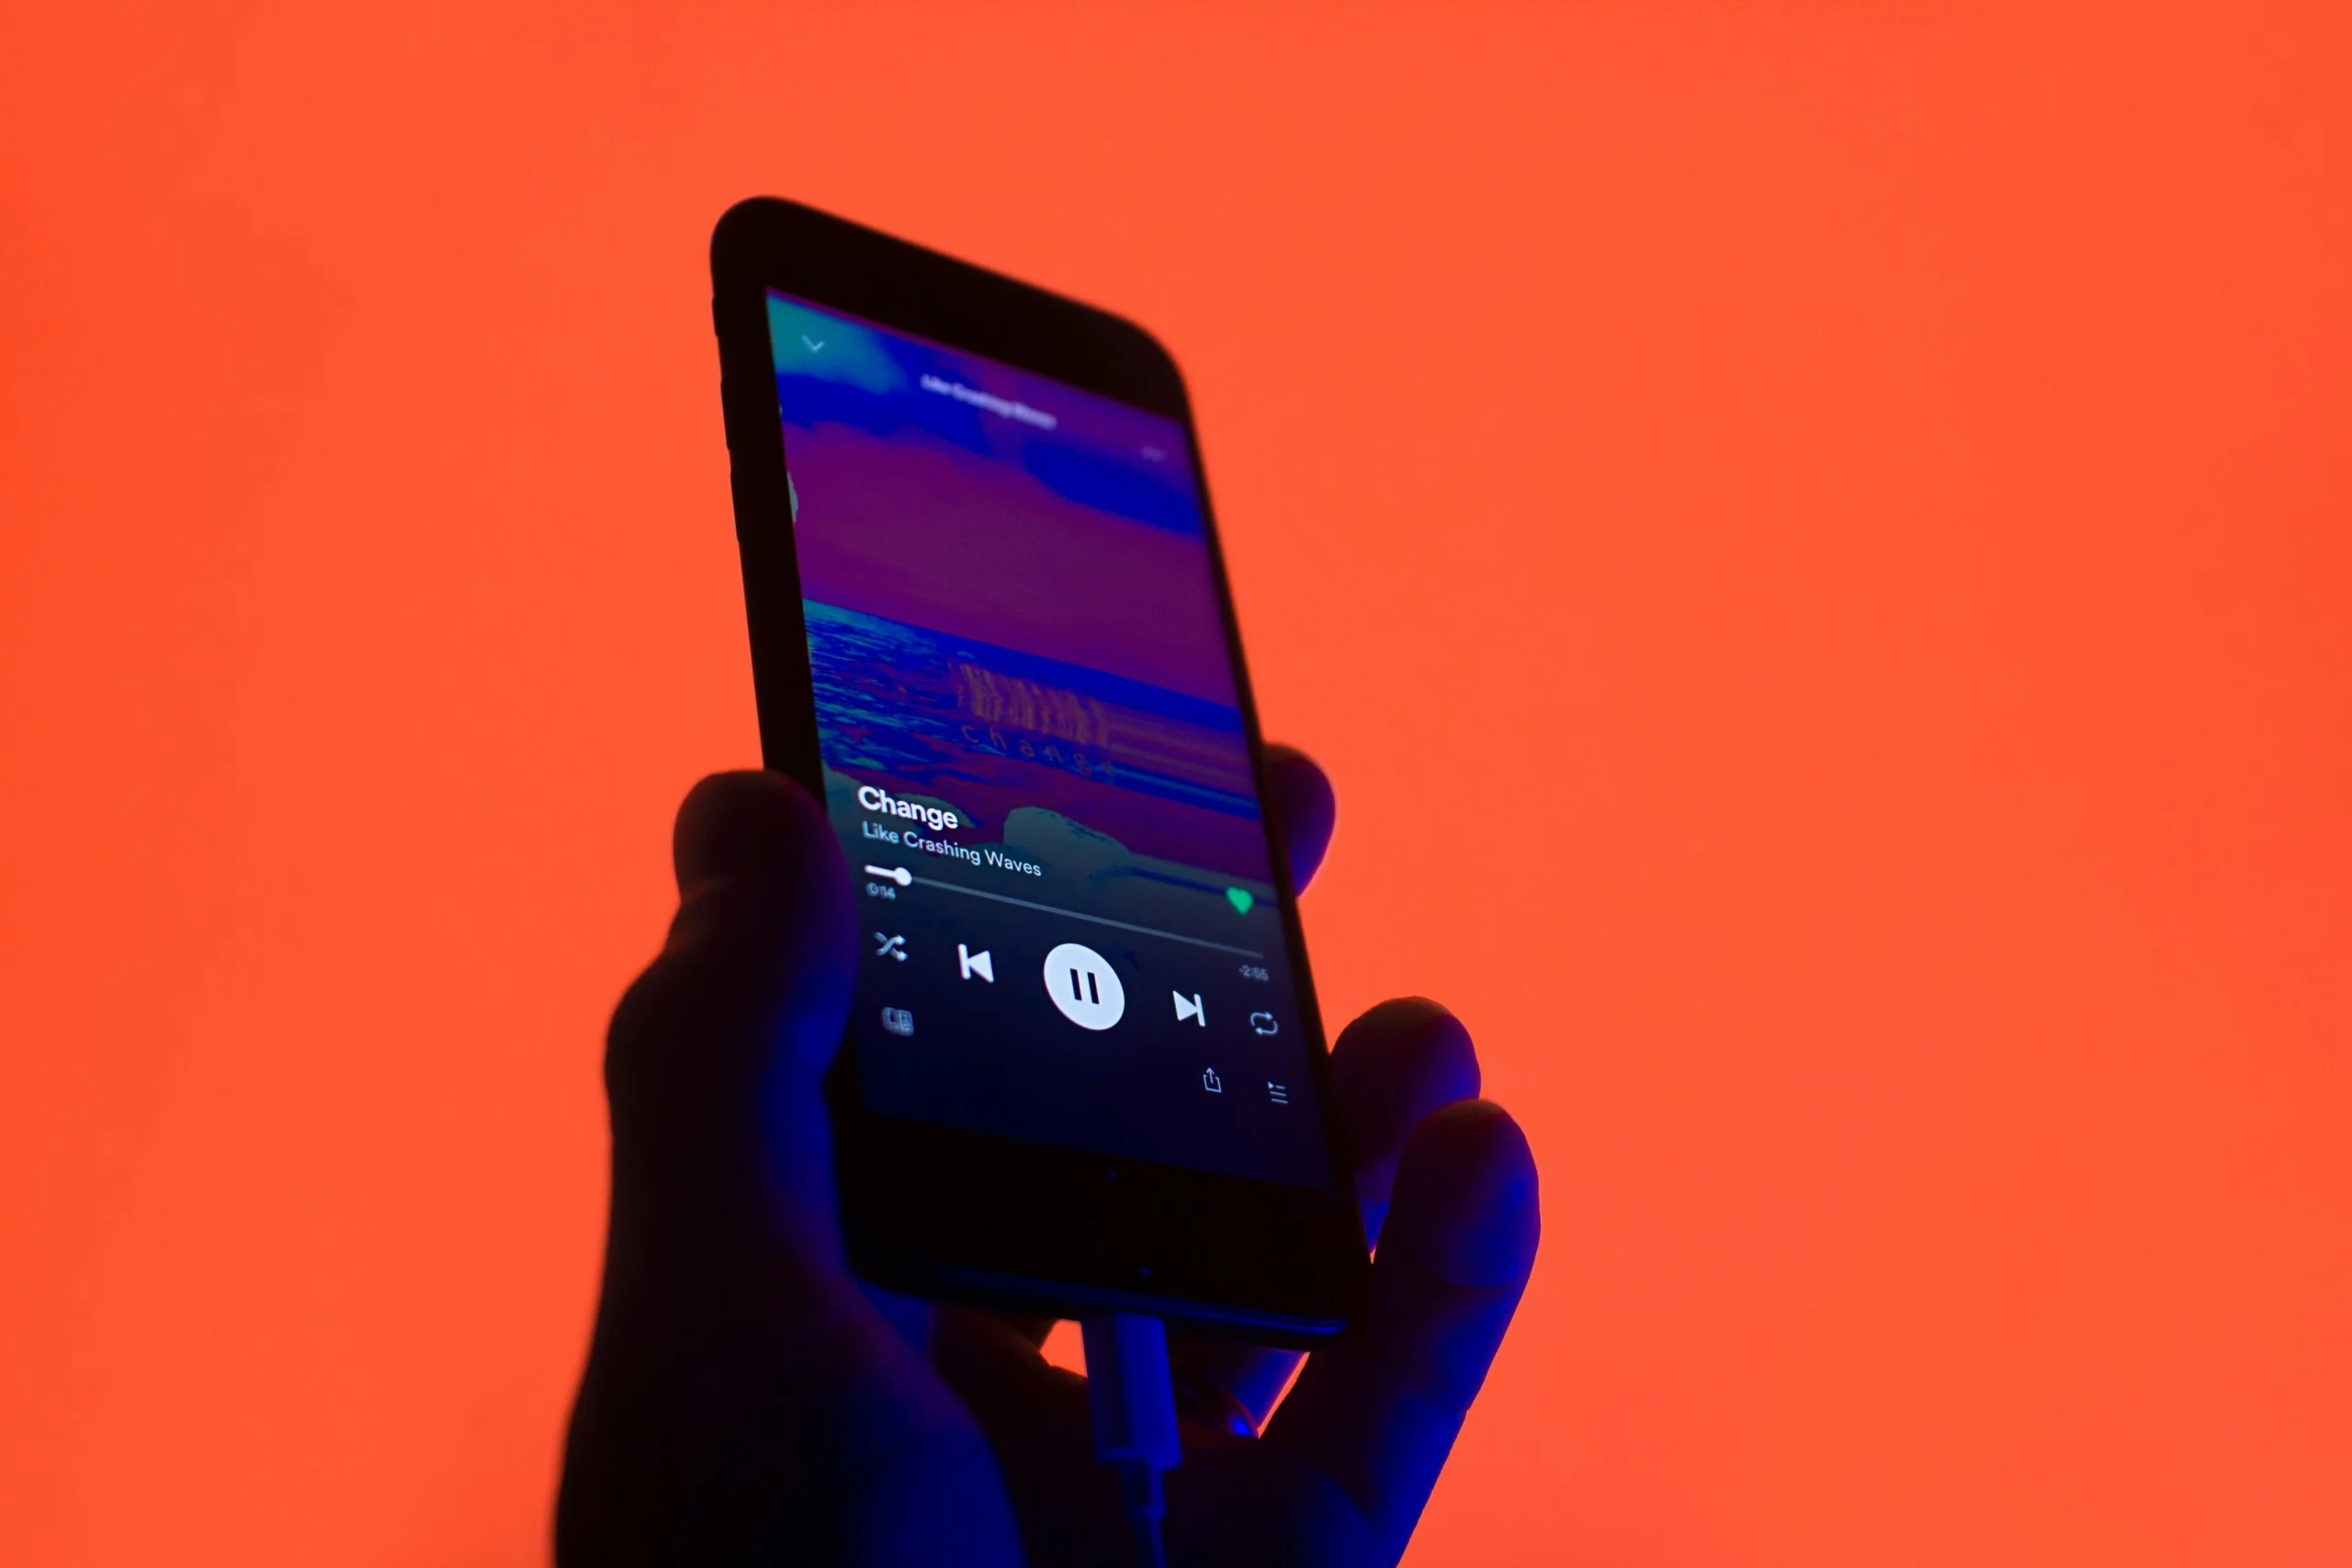 Spotify Finally Sets the Stage for CD-Quality Sound What You Need to Know About the New Lossless Audio Feature3